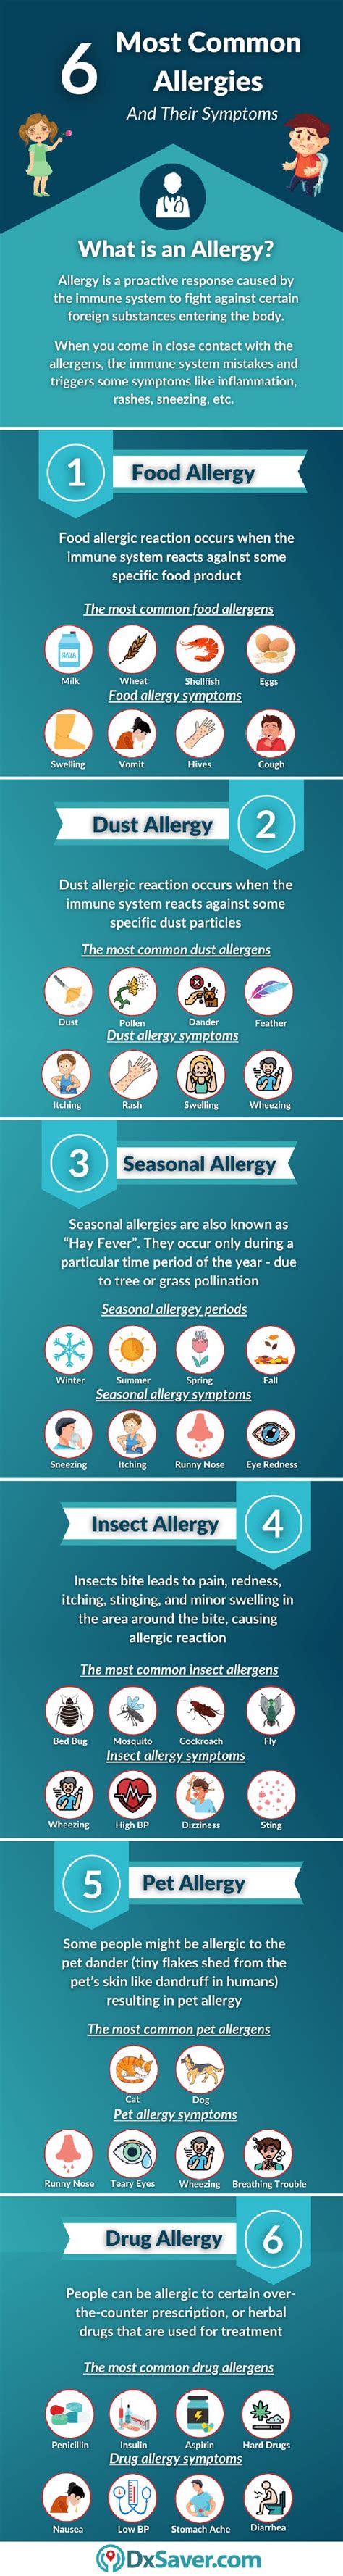 6 Most Common Types Of Allergies And Their Symptoms Infographic In